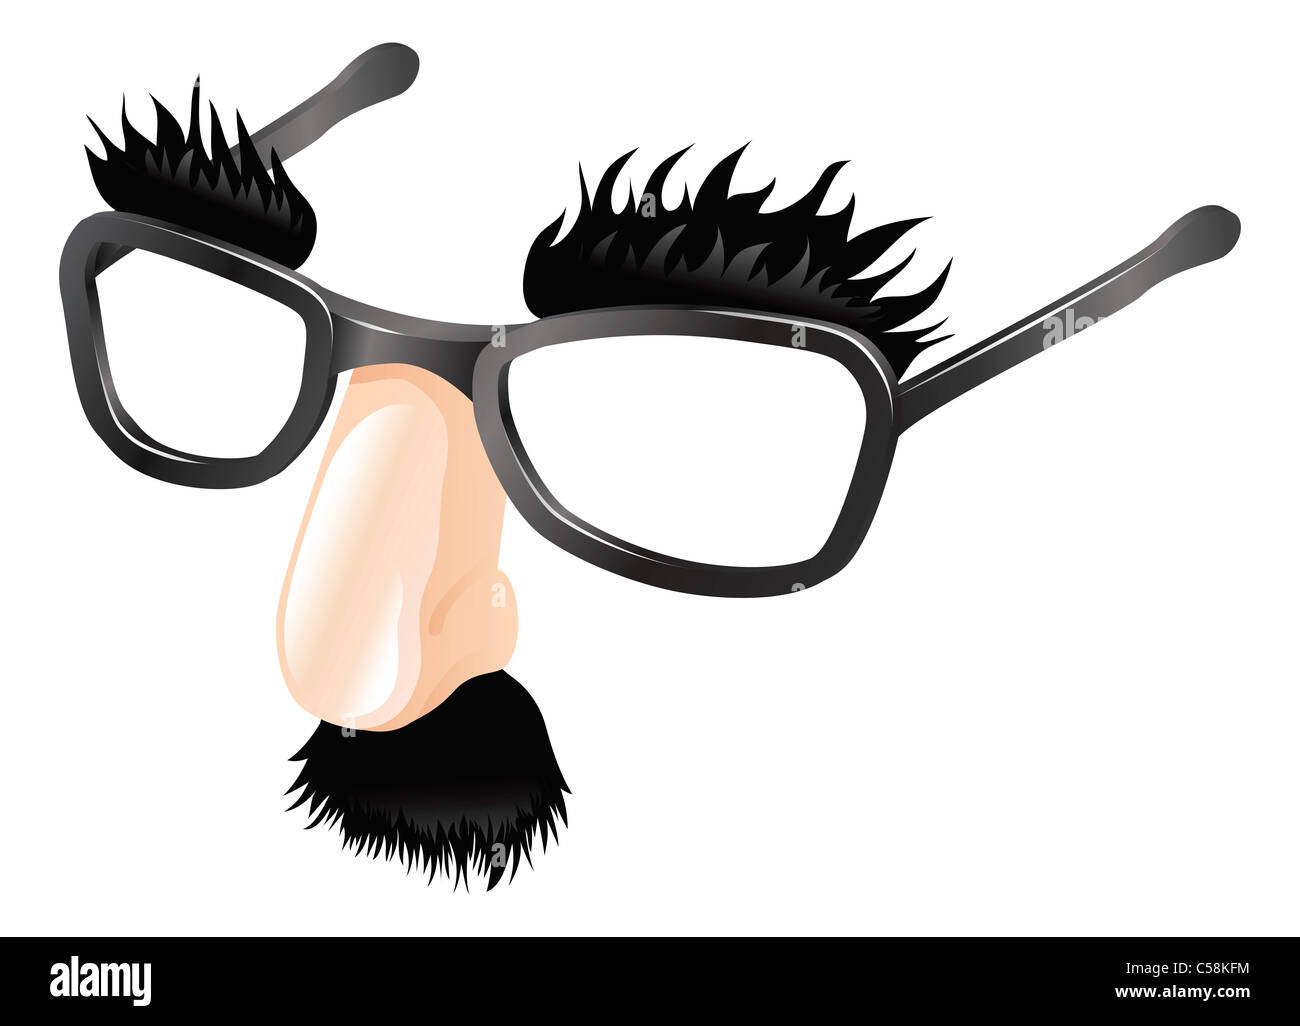 Funny disguise, comedy fake nose moustache, eyebrows and glasses. Stock Photo